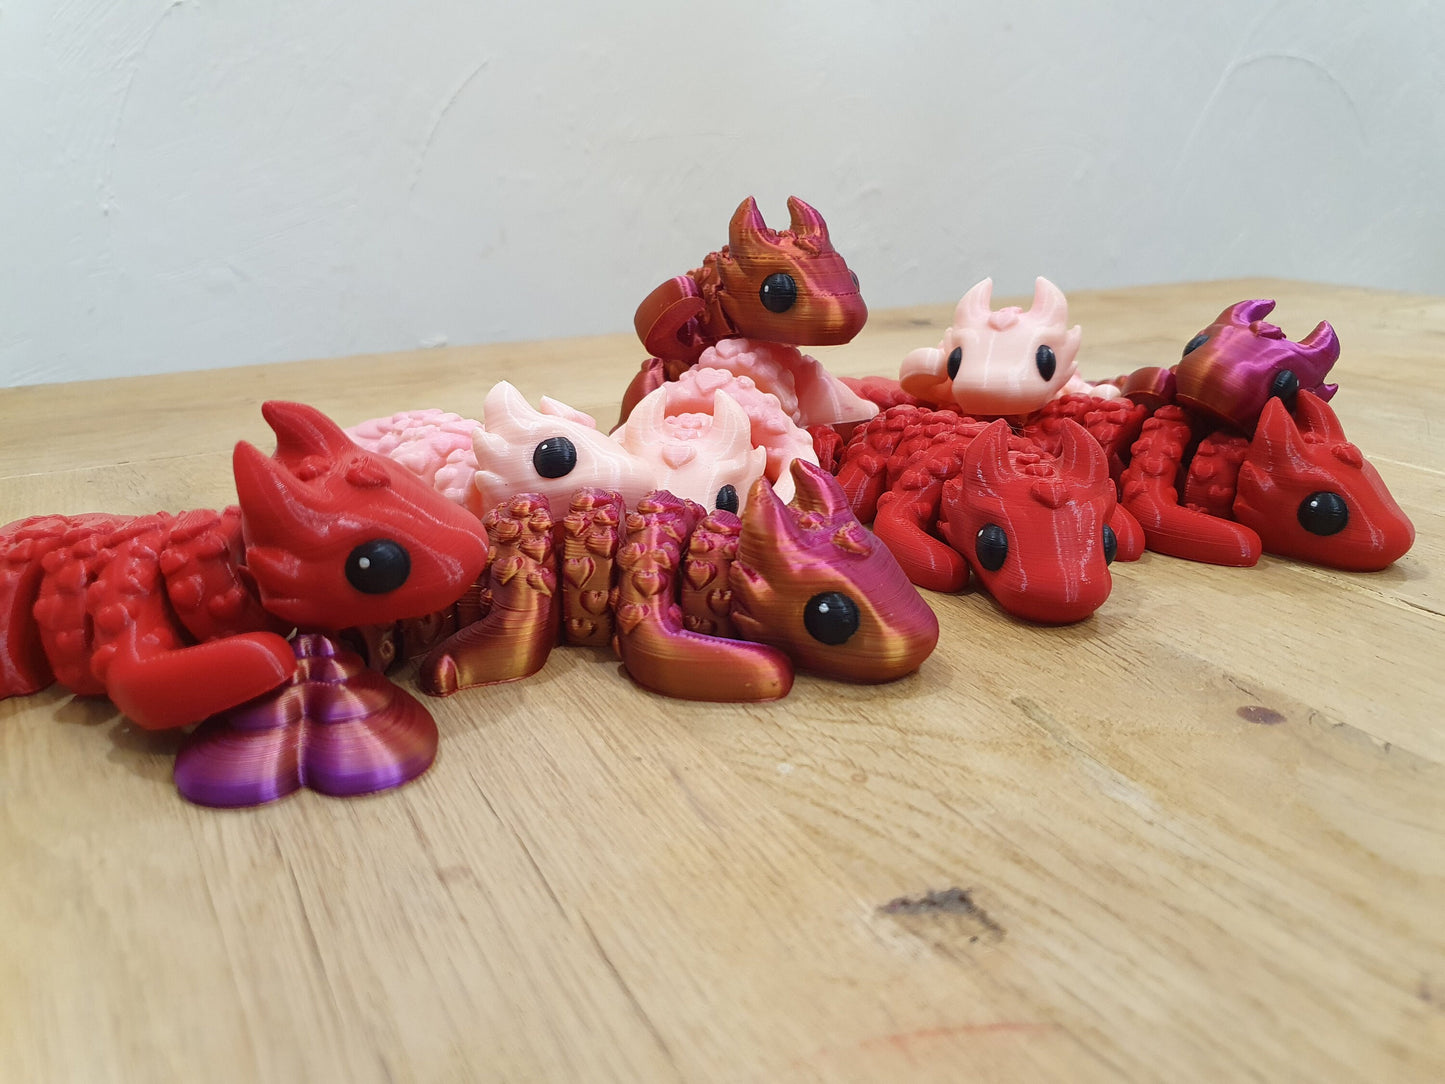 Baby Love Dragon - Articulated Flexible 3D Print. Professionally Hand painted finishing details - Valentines Day Gift